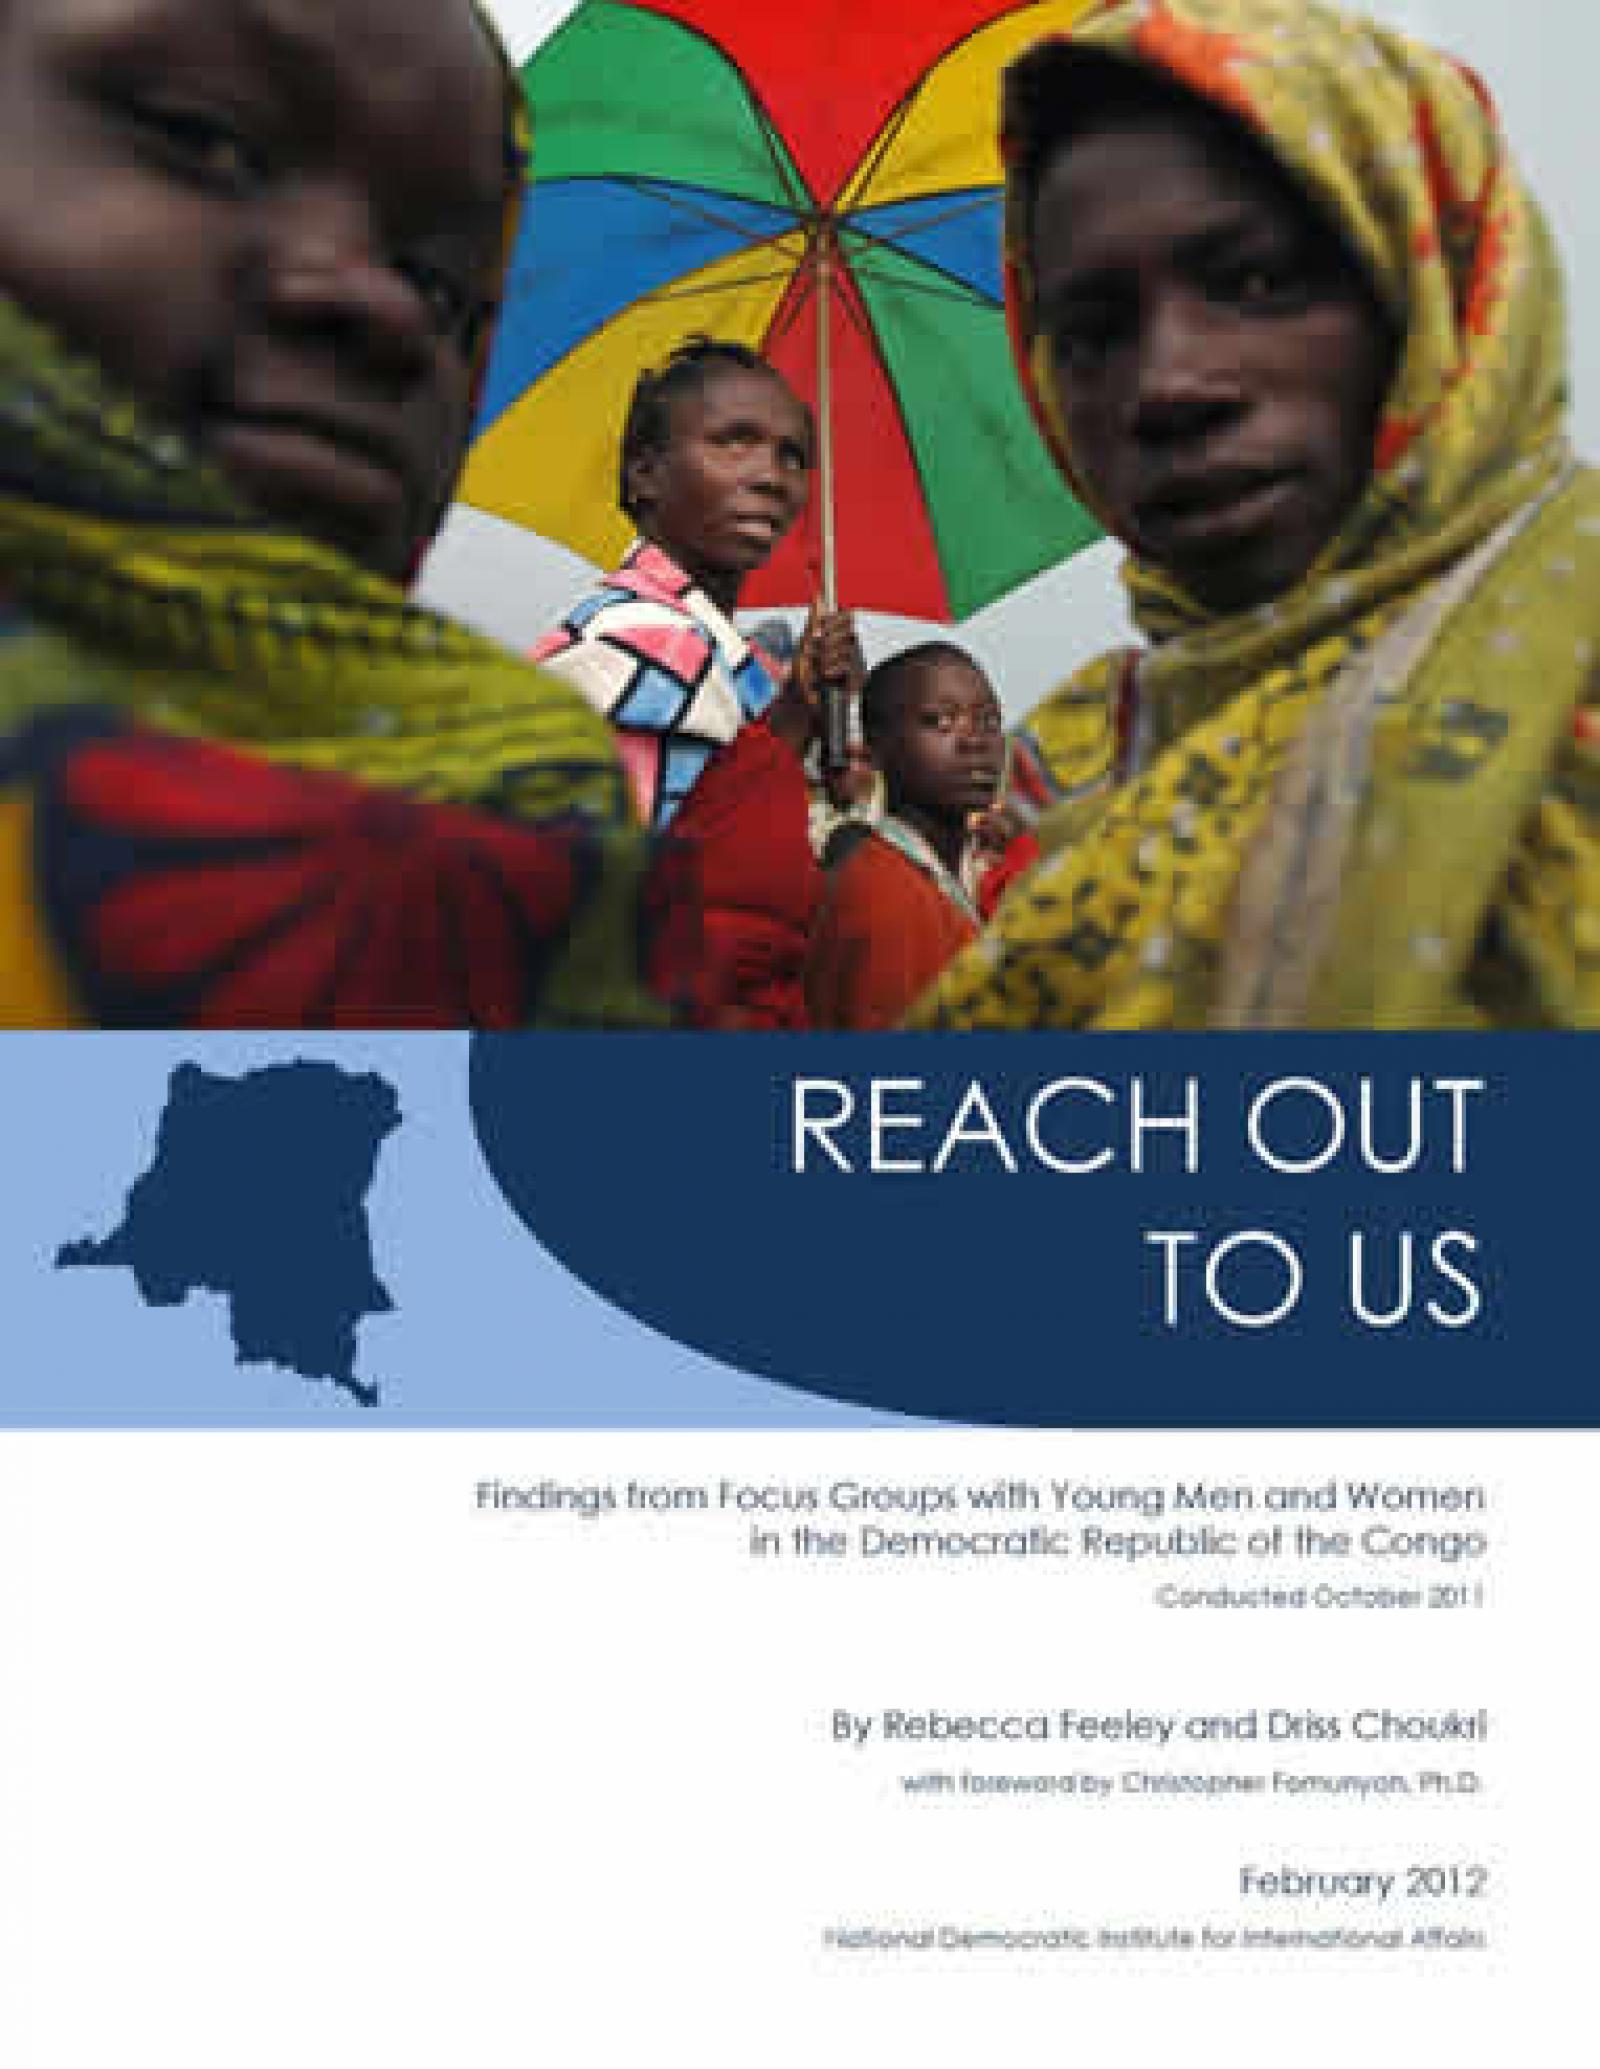 Congolese Want Leaders to “Reach Out To Us,” Opinion Research Finds 